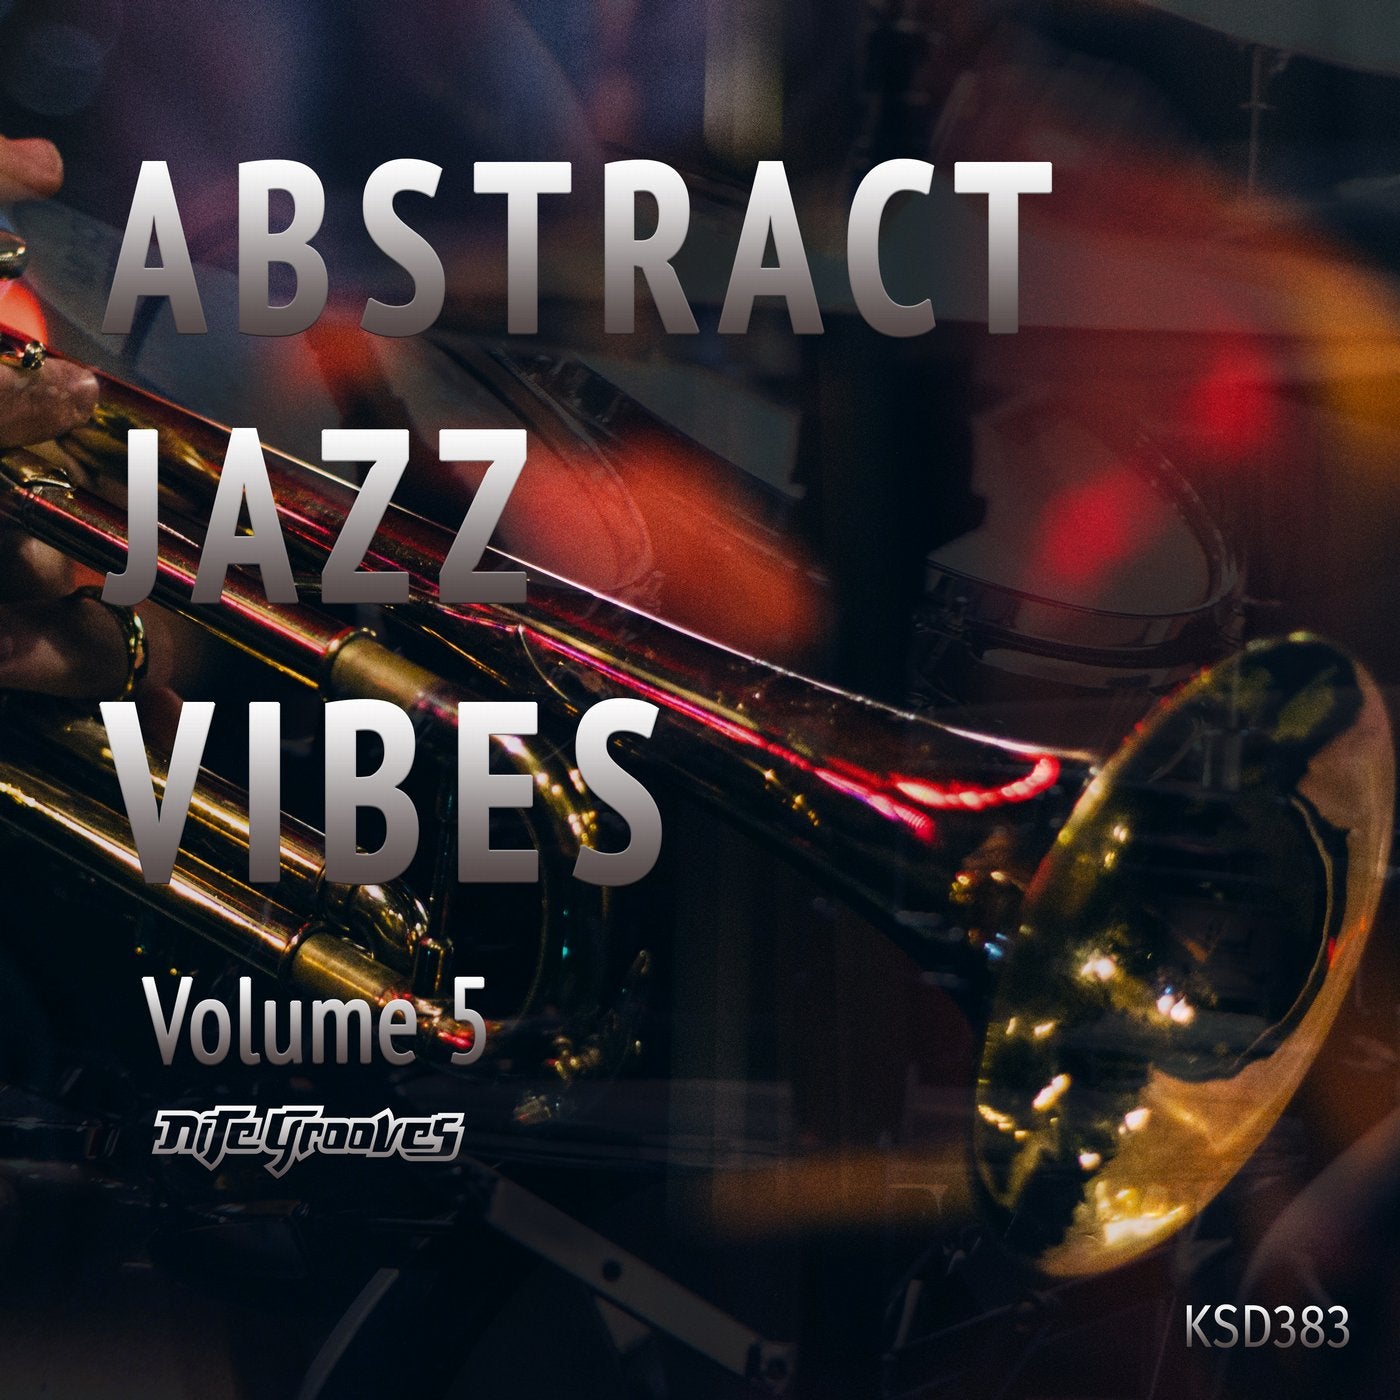 Abstract Jazz Vibes Vol. 5